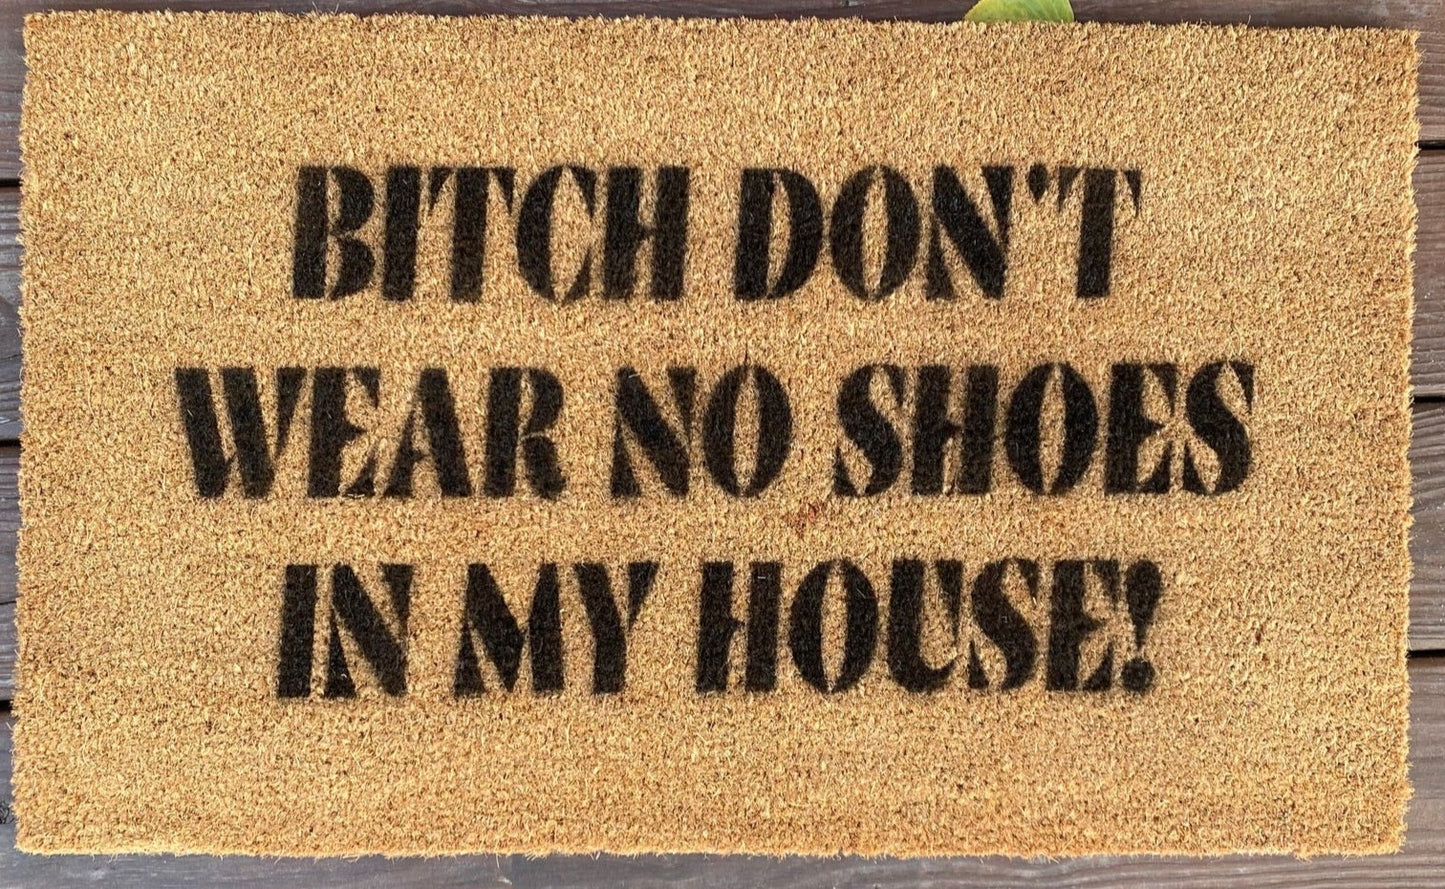 B*tch Dont Wear No Shoes In My House!